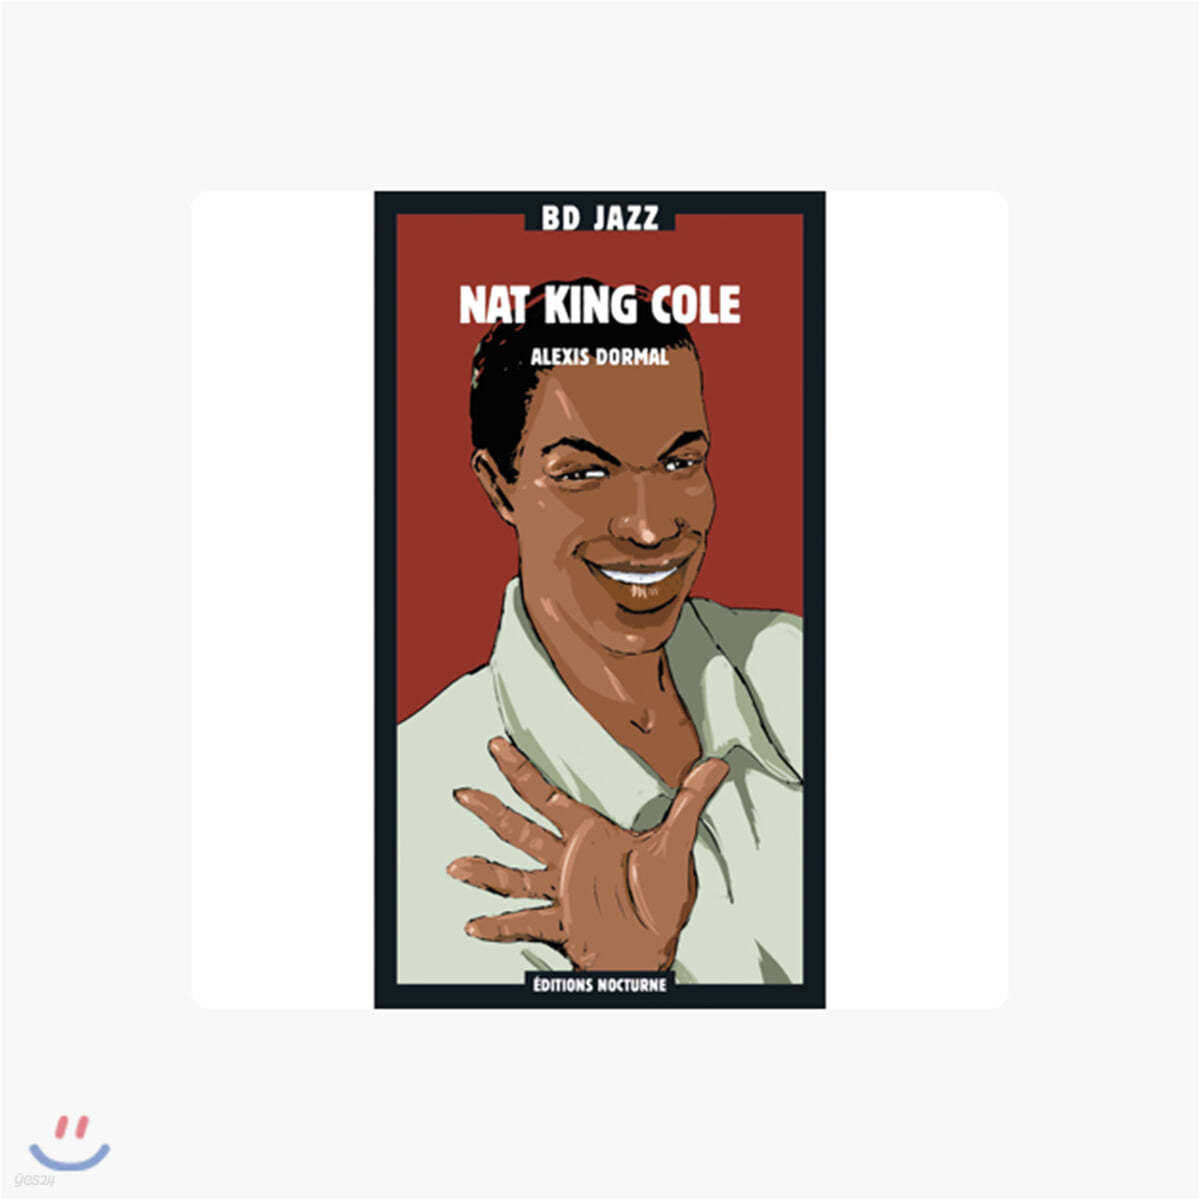 Nat King Cole (Illustrated by Alexis Dormal 알렉시스 도말)